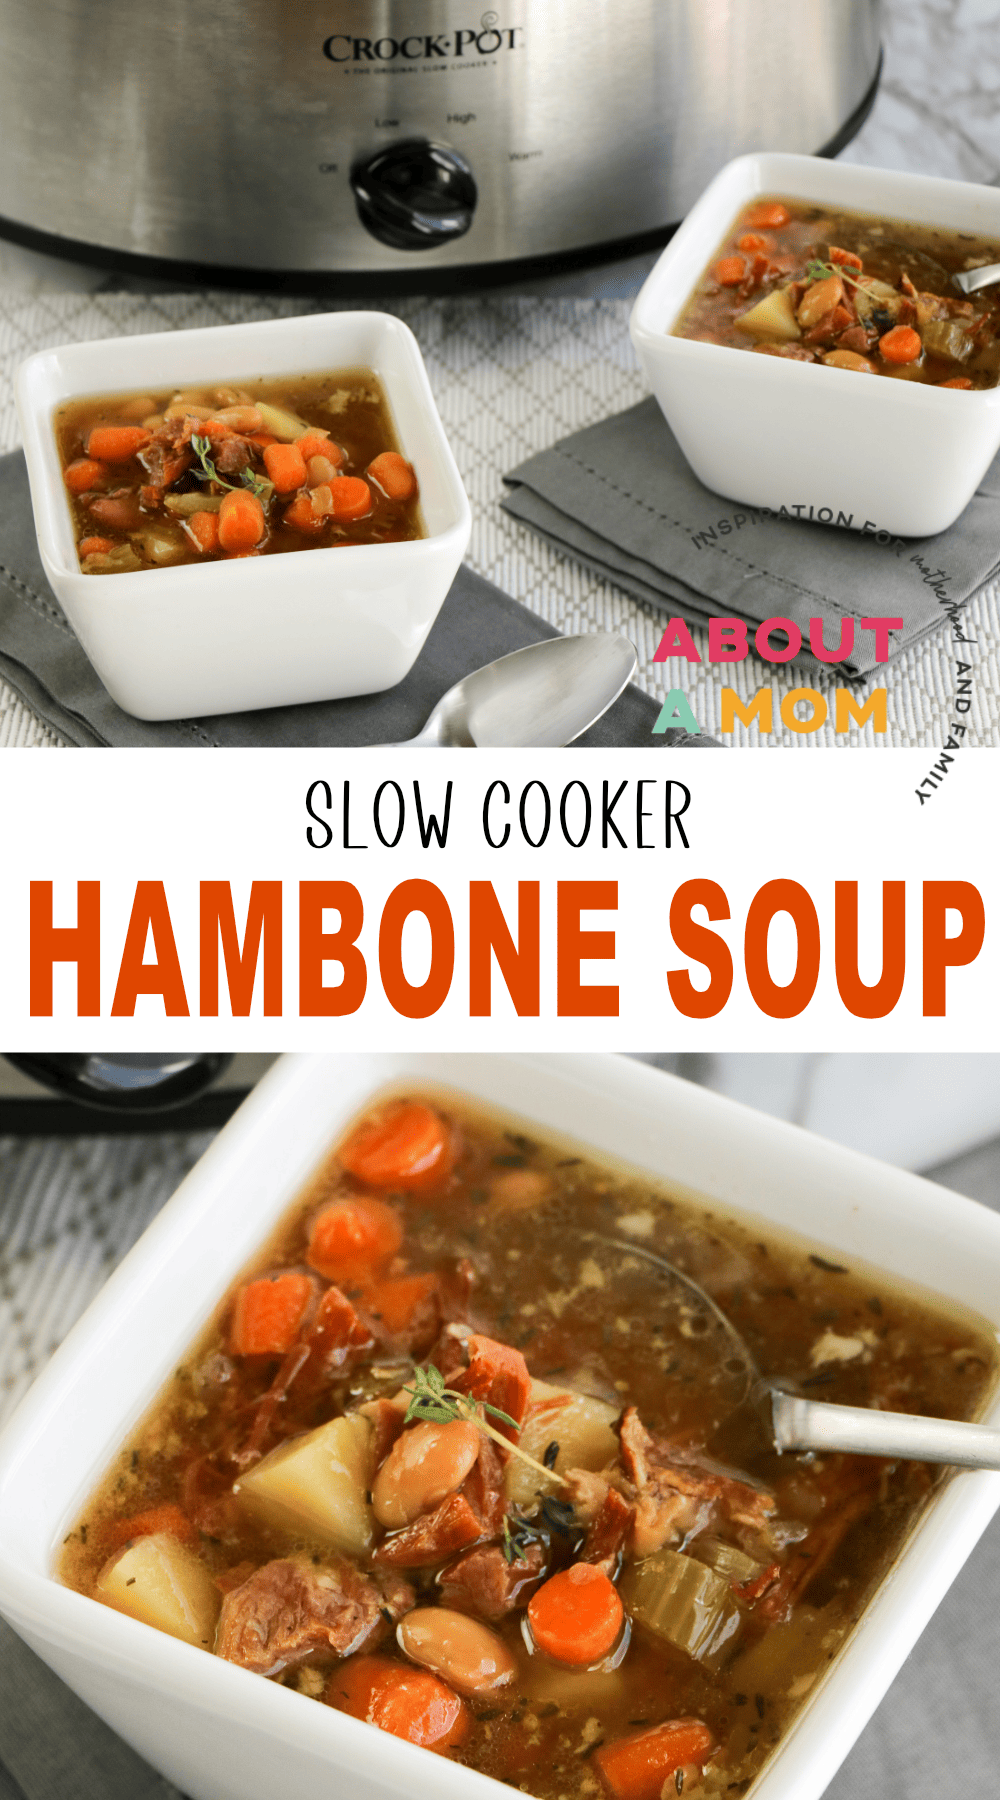 This slow cooker ham bone soup recipe is a great way to use up any leftover ham from Easter, Thanksgiving, Christmas, or anytime! The meat and veggie combo offers a healthy main course loaded with nutrition too!